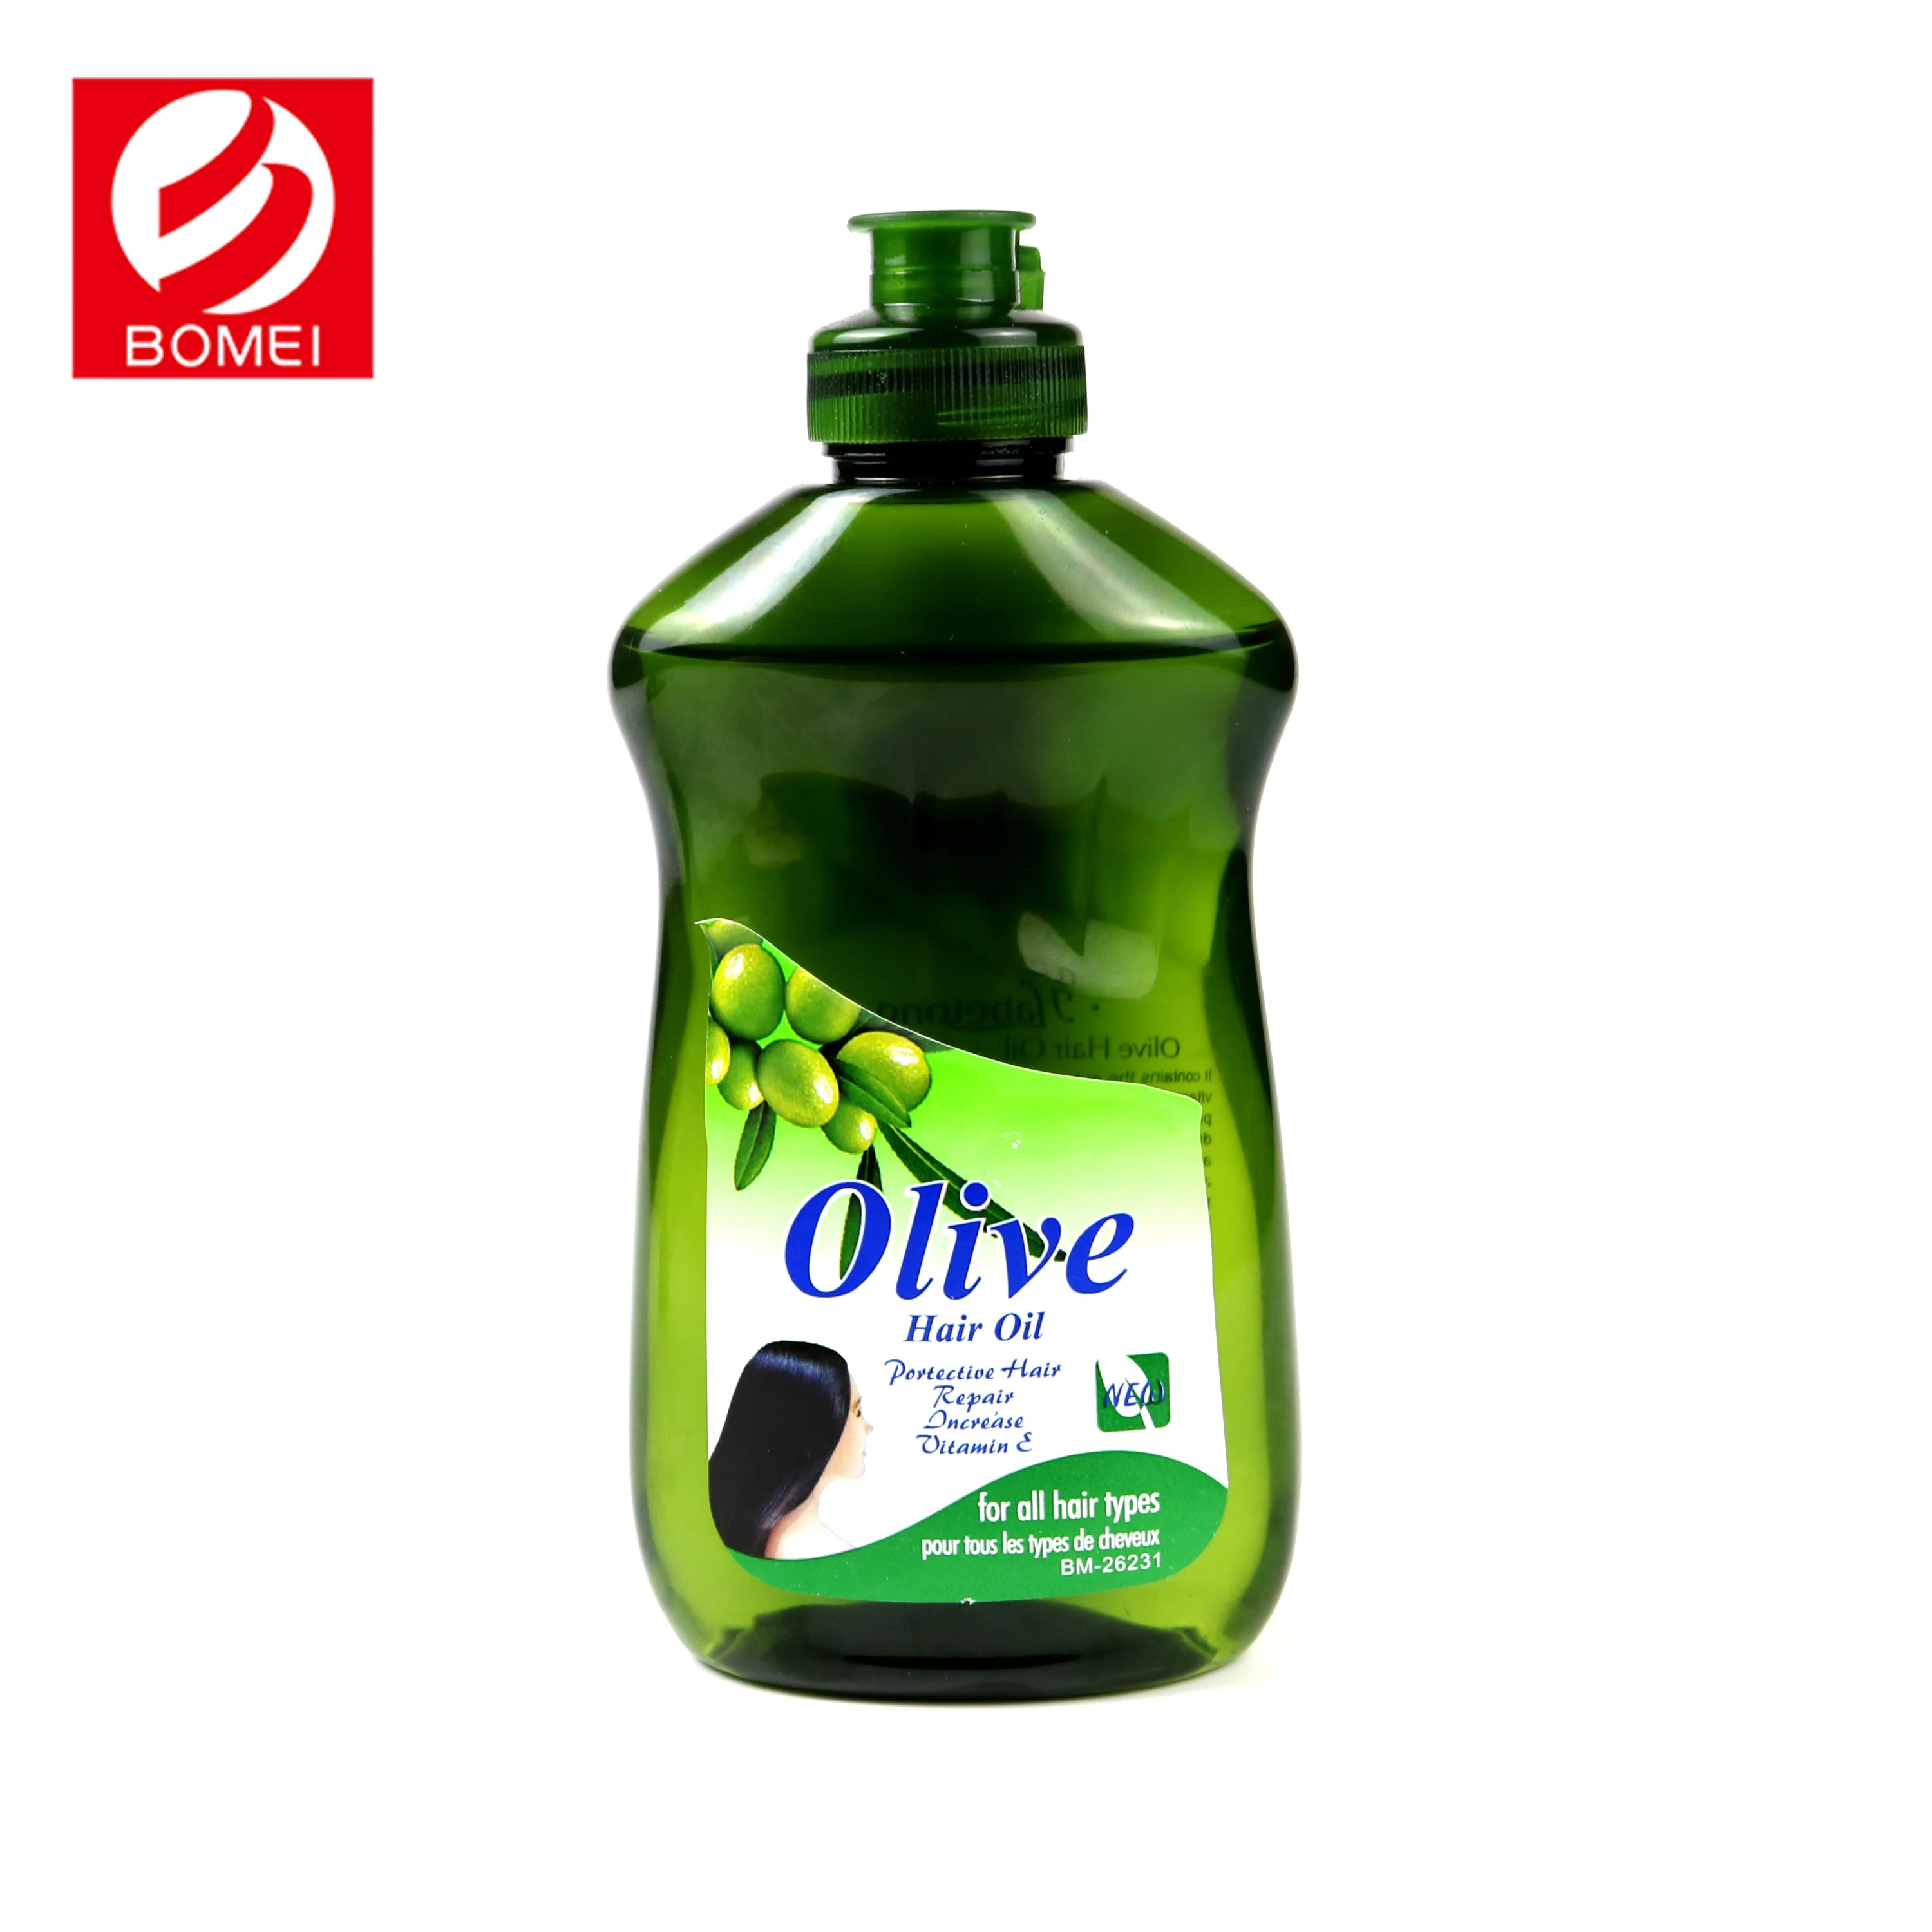 Best Selling Products Hair Treatment Smoothing Bright Snail And Olive Hair  Oil - Buy Hair Oil,Olive Hair Oil,Hair Treatment Hair Oil Product on  